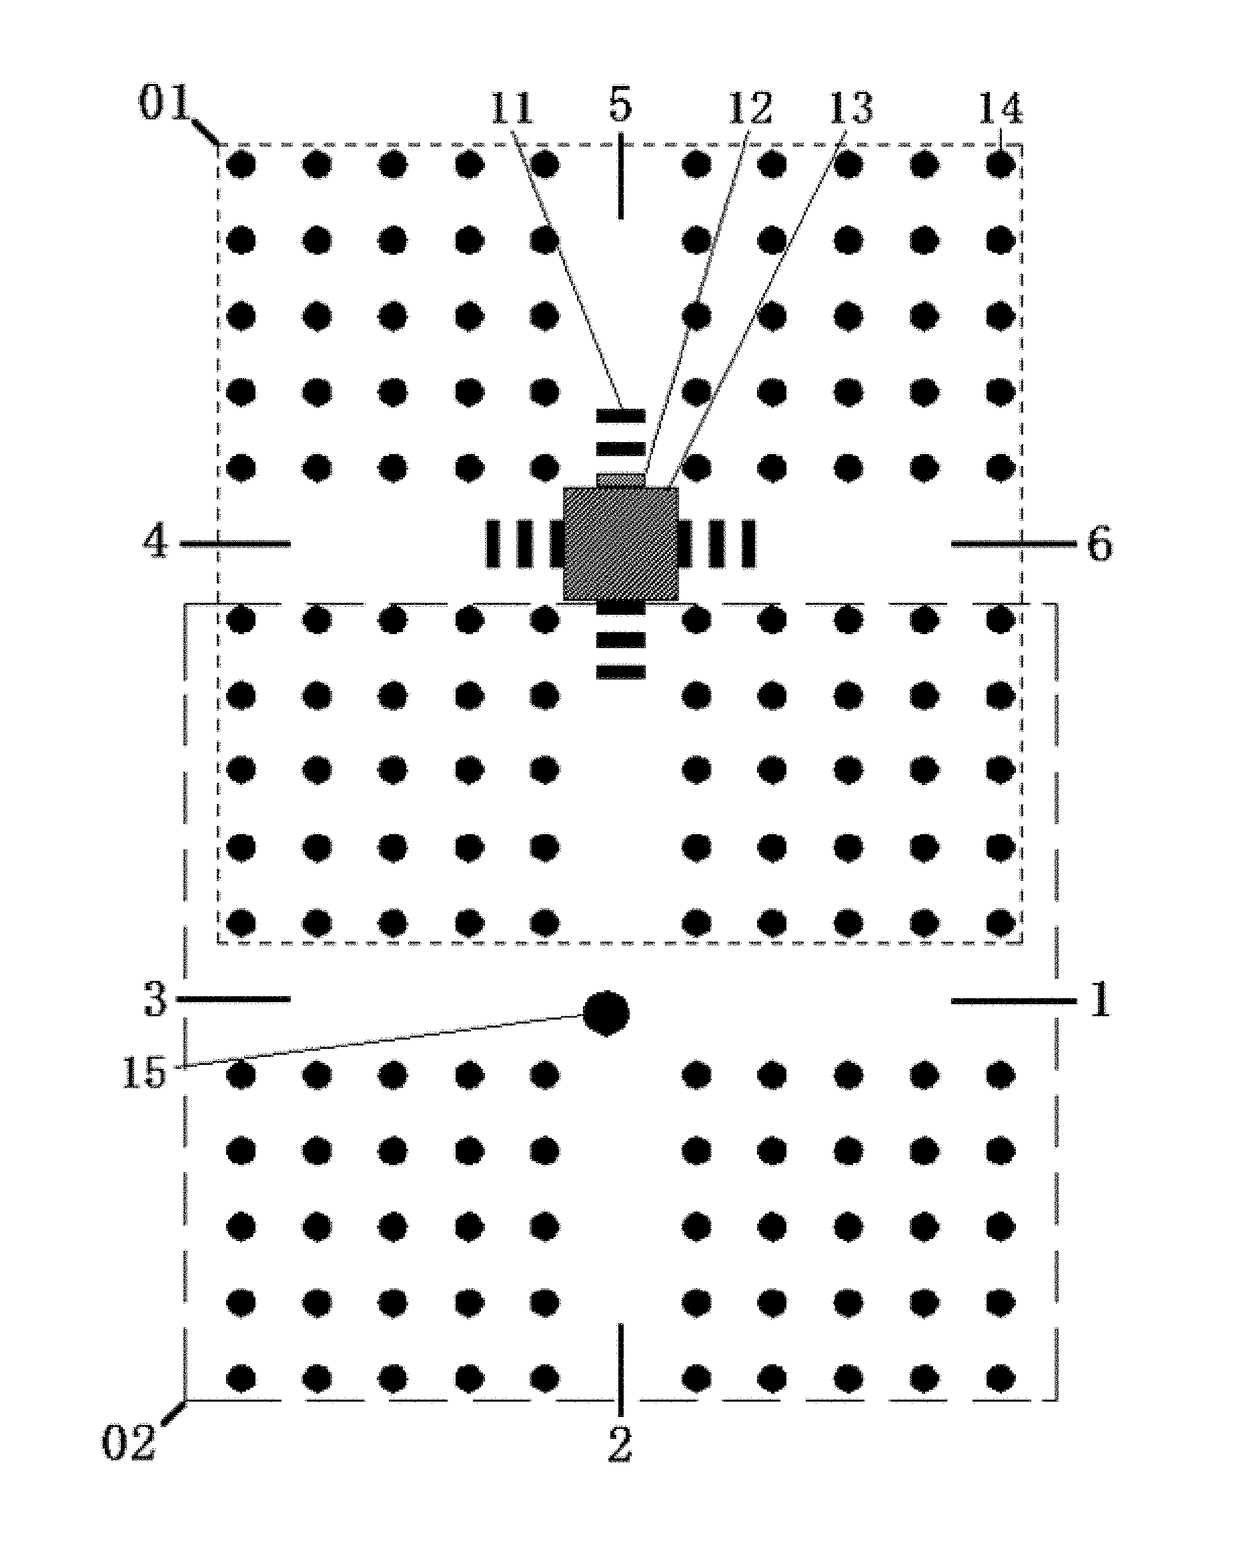 High-contrast photonic crystal "or," "not" and "xor" logic gate